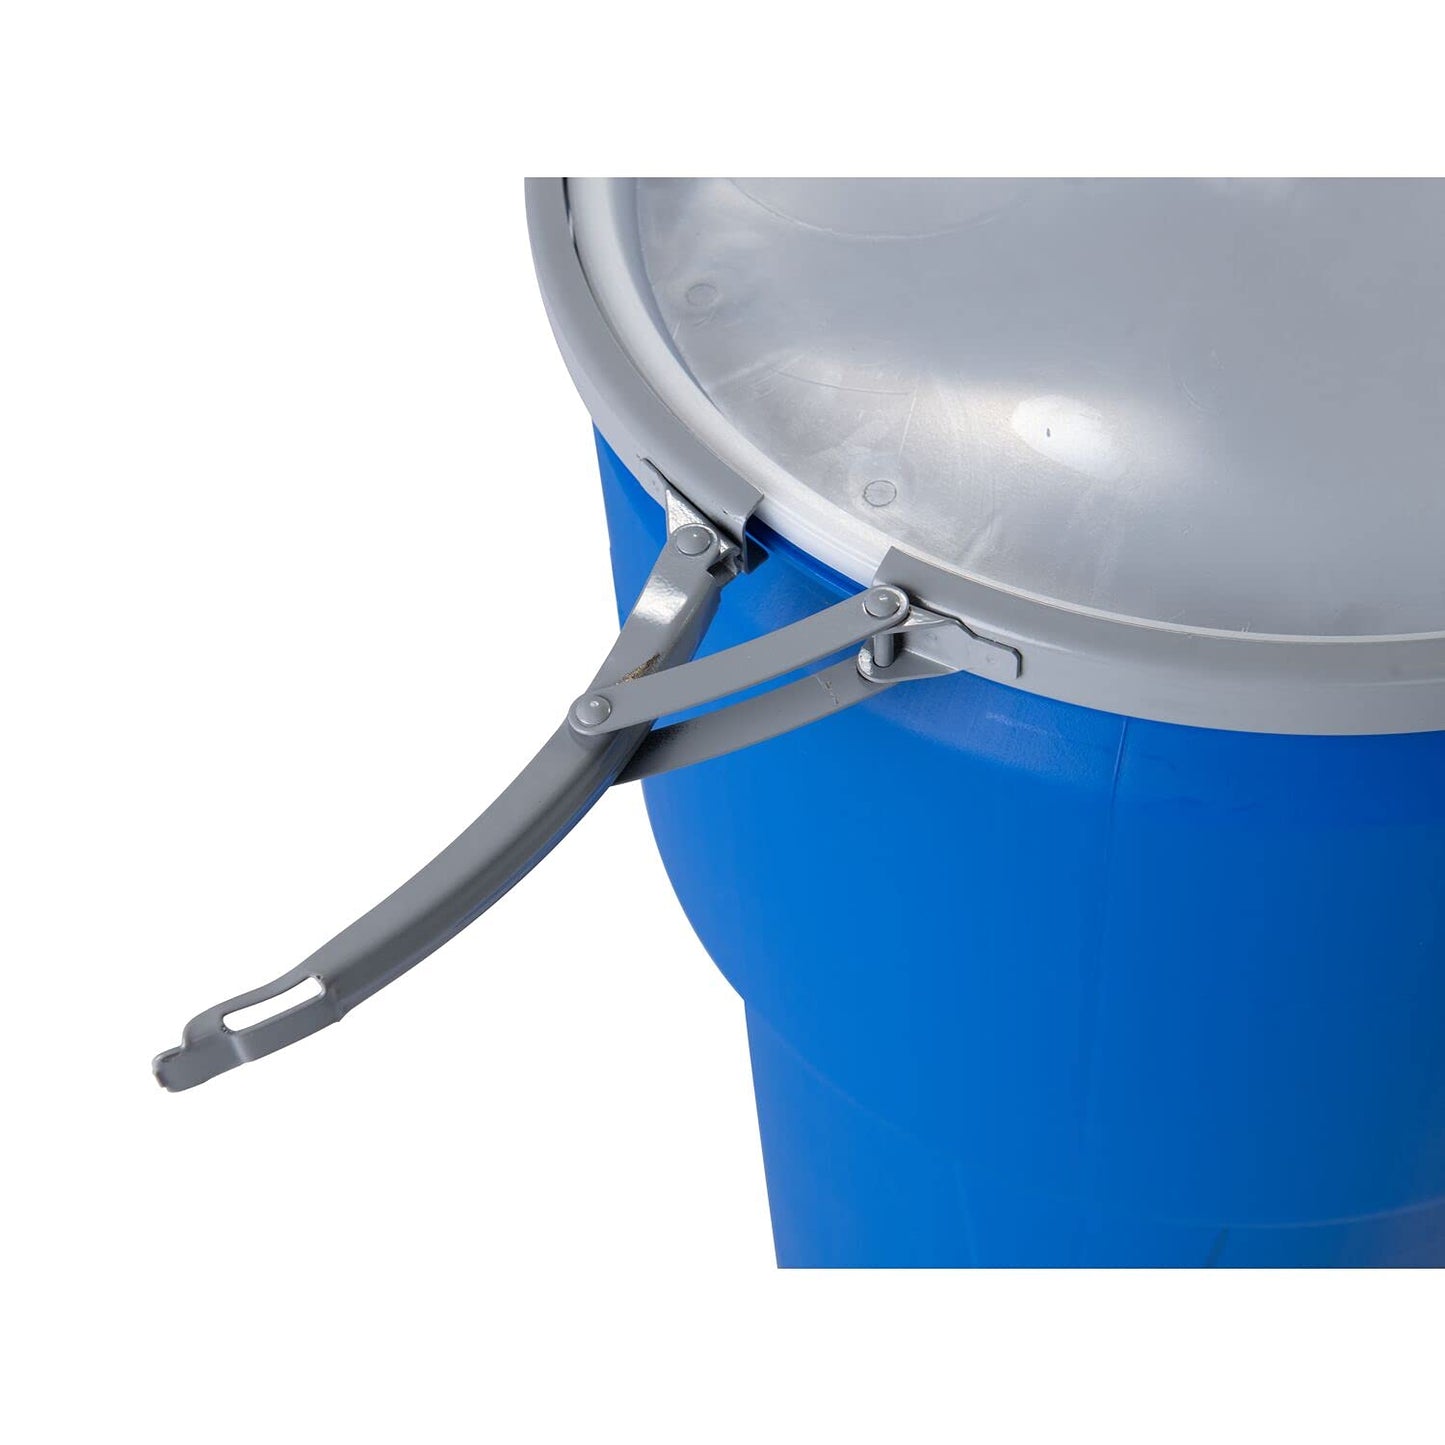 Eagle Mfg Transport Drum - Open Head, Polyethylene, Unlined, Blue, Lever Lock Ring, Plastic Drum with Metal Ring, Chemical & Weather Resistant, 14 gal